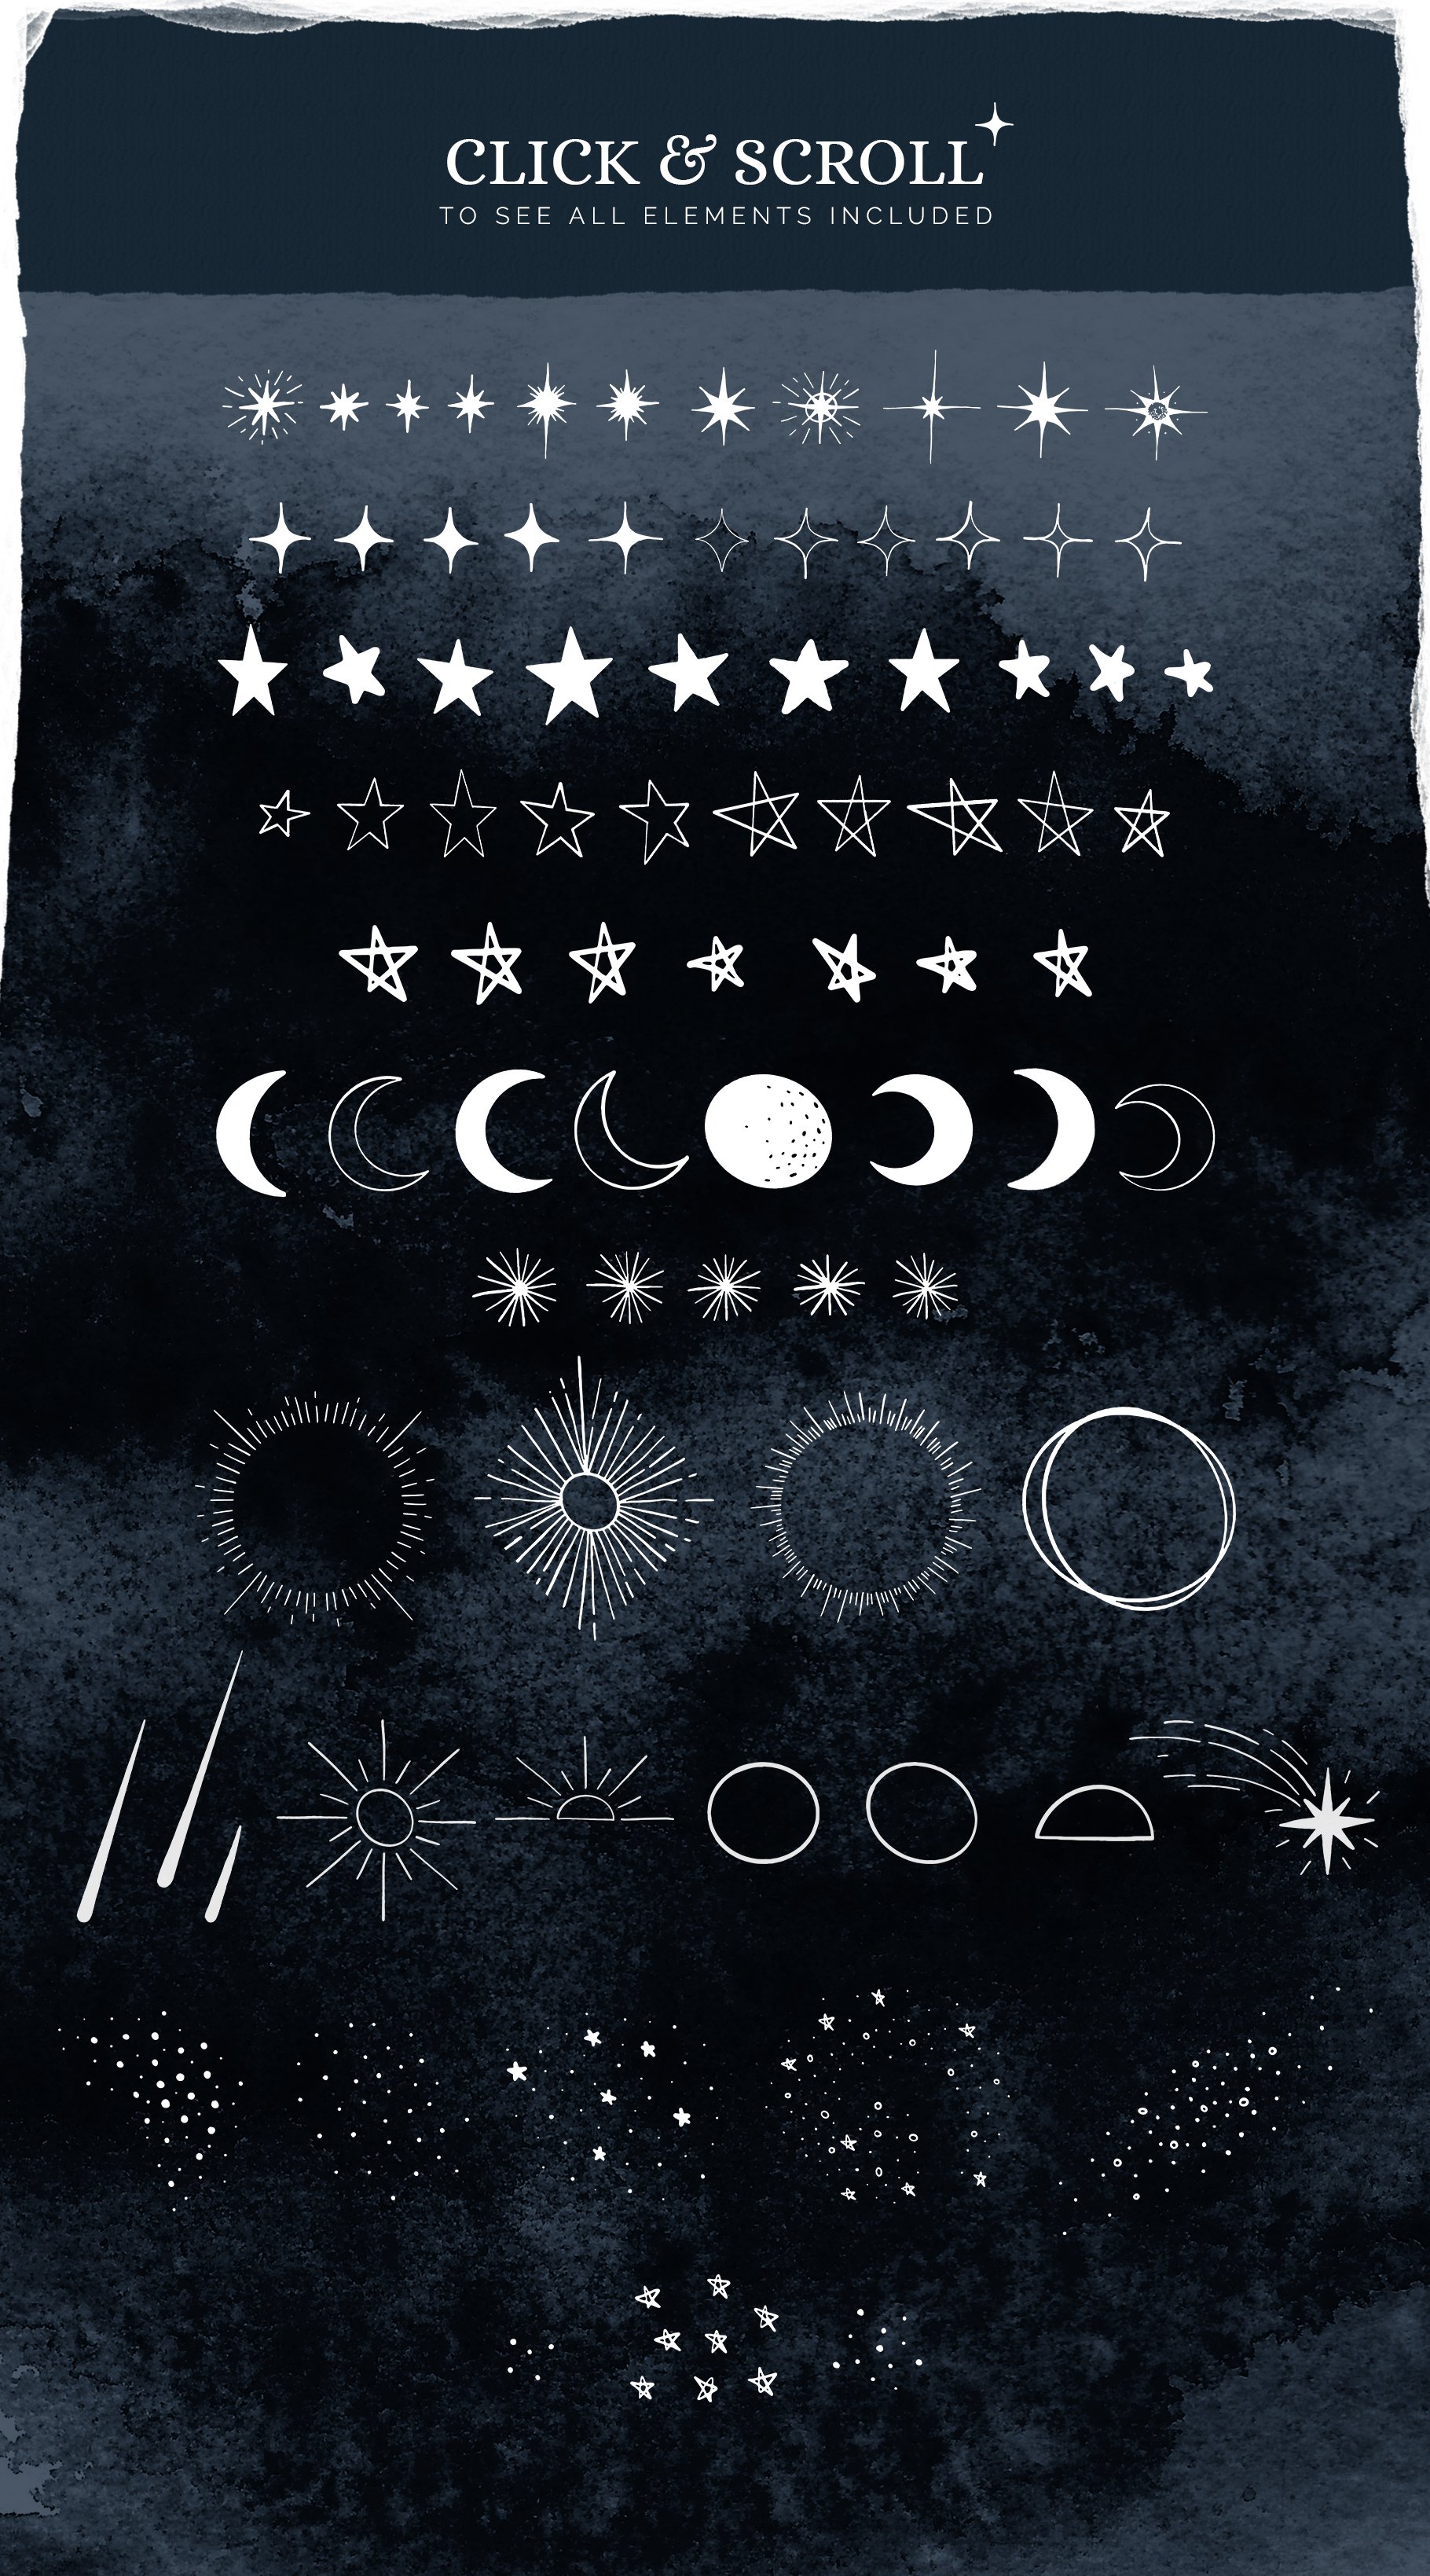 Stars, Moons & other Celestials preview image.